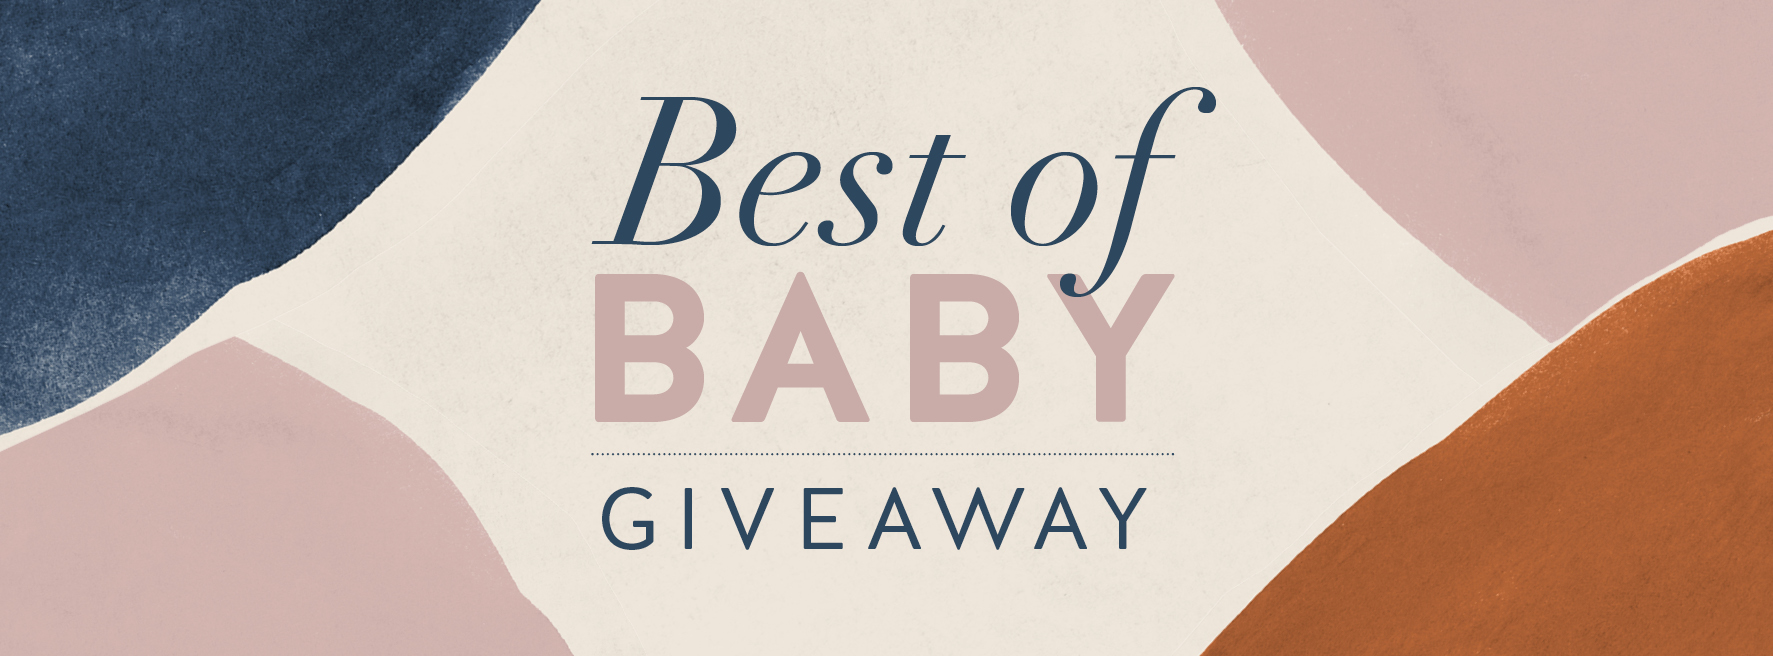 Best of Baby Giveaway